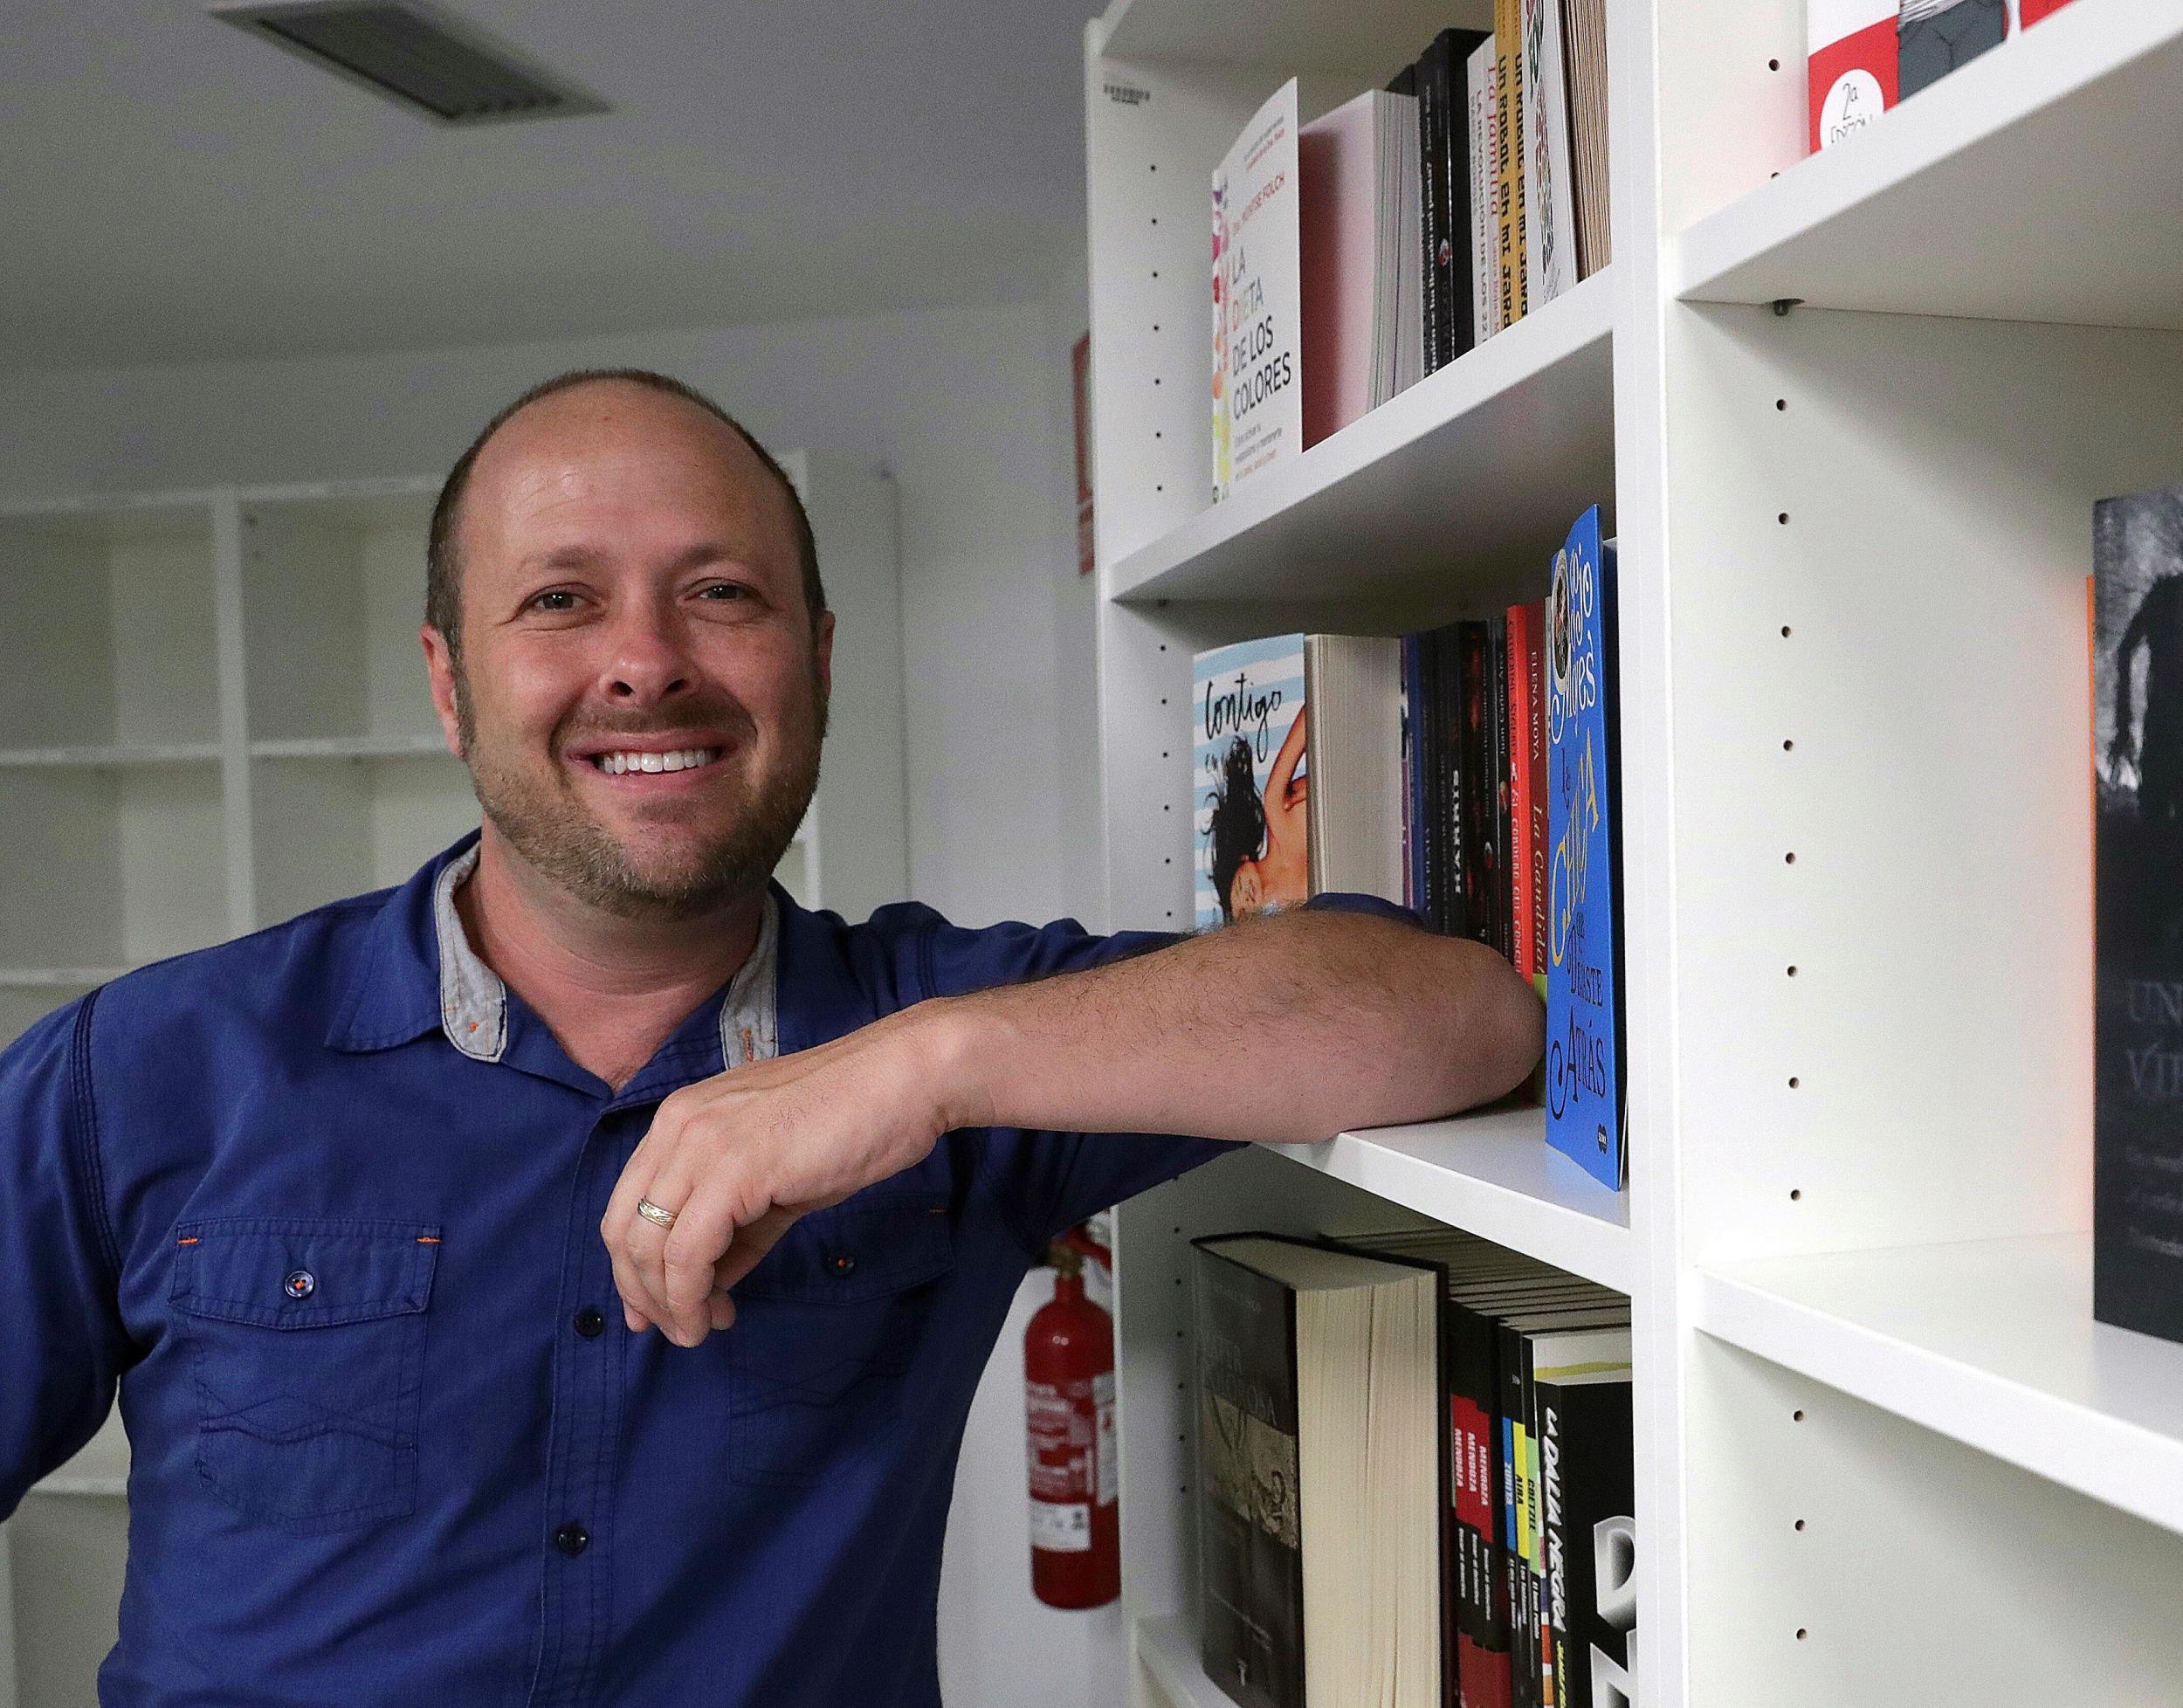 '13 Reasons Why' author Jay Asher